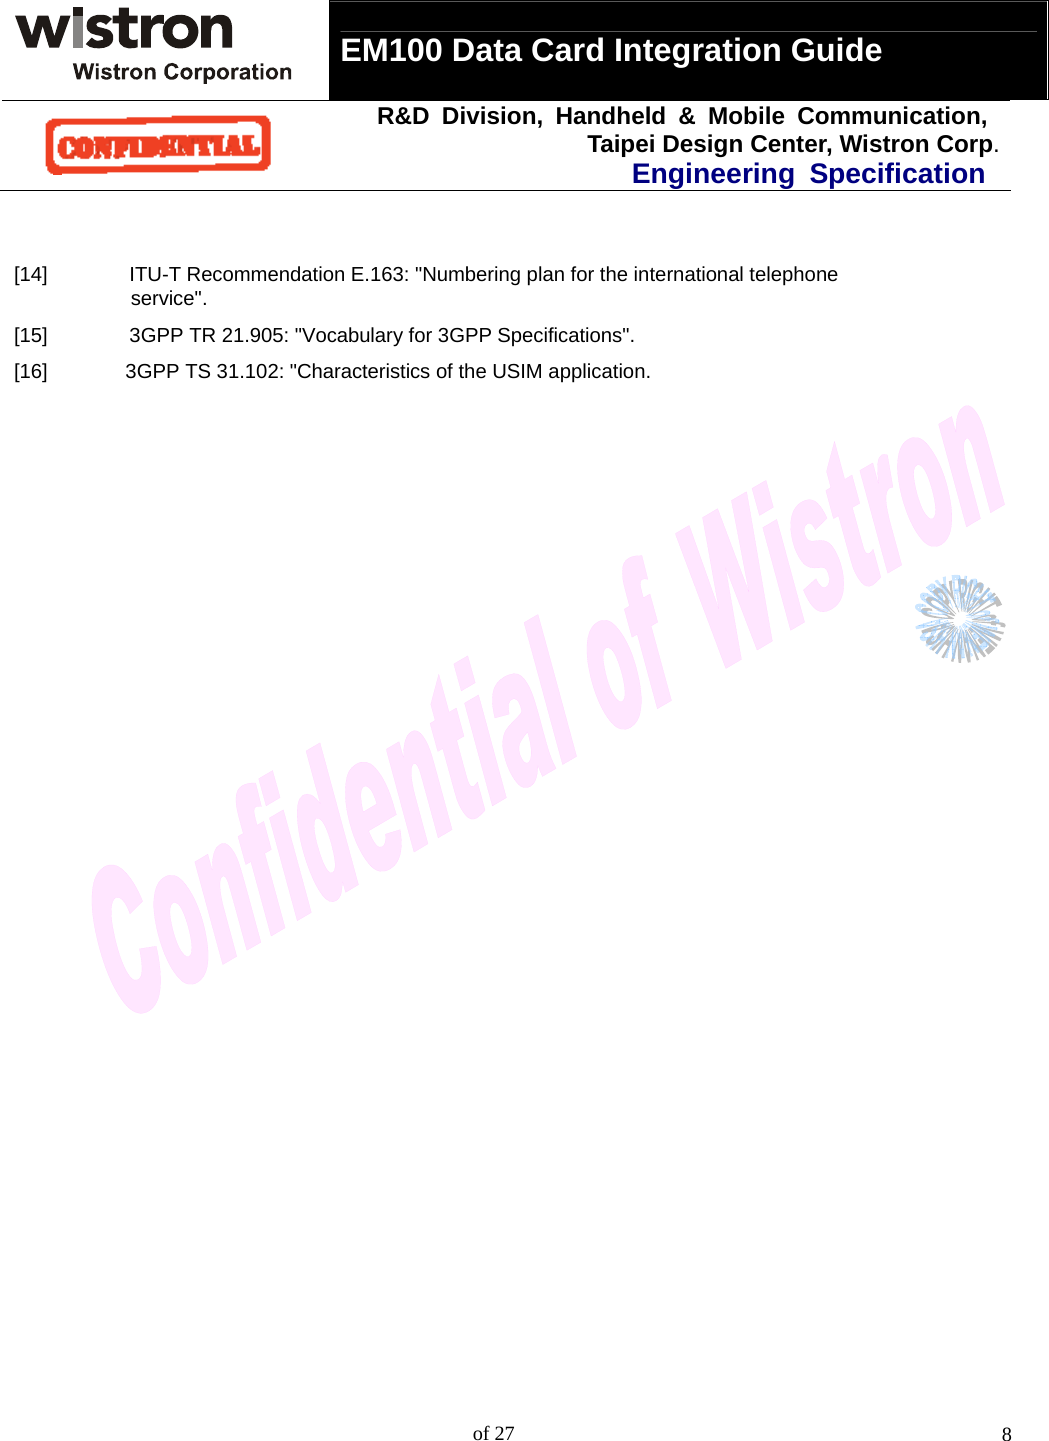  EM100 Data Card Integration Guide   R&amp;D Division, Handheld &amp; Mobile Communication, Taipei Design Center, Wistron Corp.Engineering Specification    of 27  8   [14]  ITU-T Recommendation E.163: &quot;Numbering plan for the international telephone service&quot;.  [15]  3GPP TR 21.905: &quot;Vocabulary for 3GPP Specifications&quot;.  [16]  3GPP TS 31.102: &quot;Characteristics of the USIM application. 